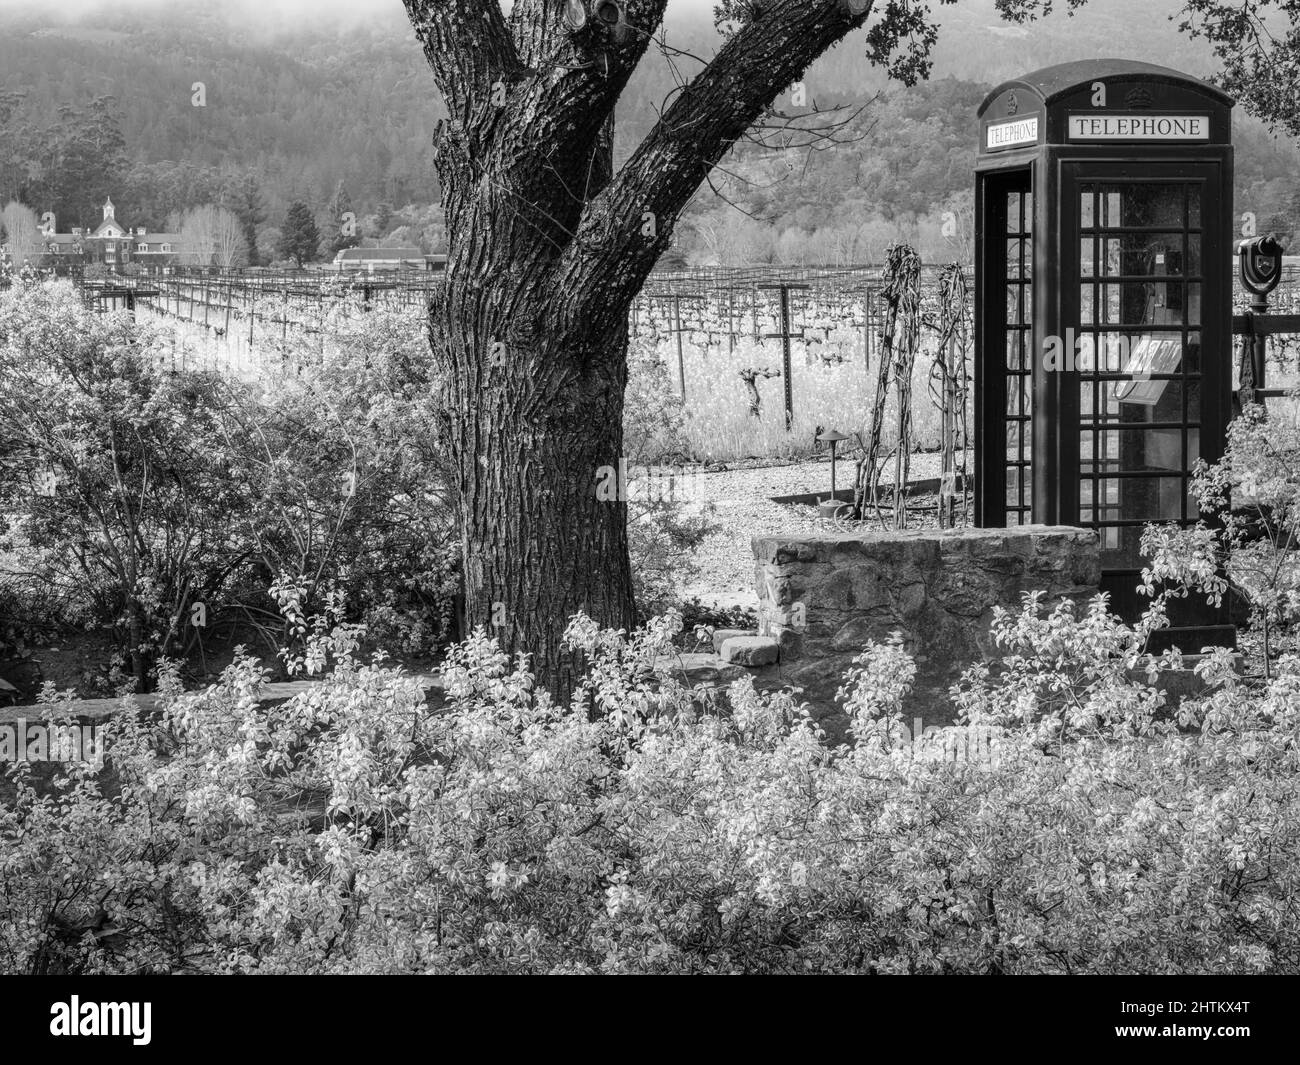 A picturesque vineyard setting with an old fashioned telephone box, Napa Valley, California Stock Photo